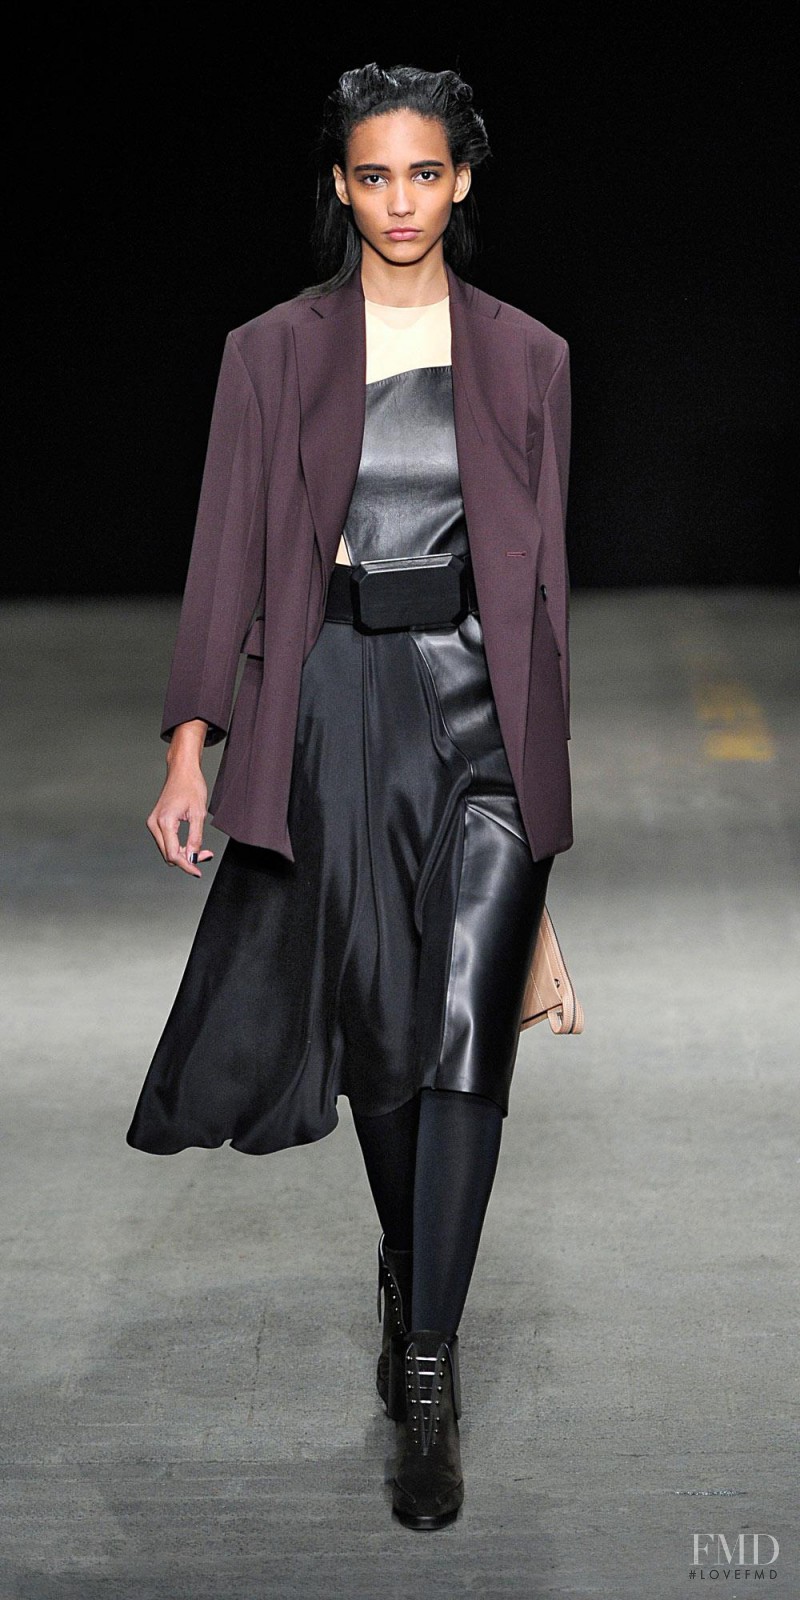 Cora Emmanuel featured in  the 3.1 Phillip Lim fashion show for Autumn/Winter 2014